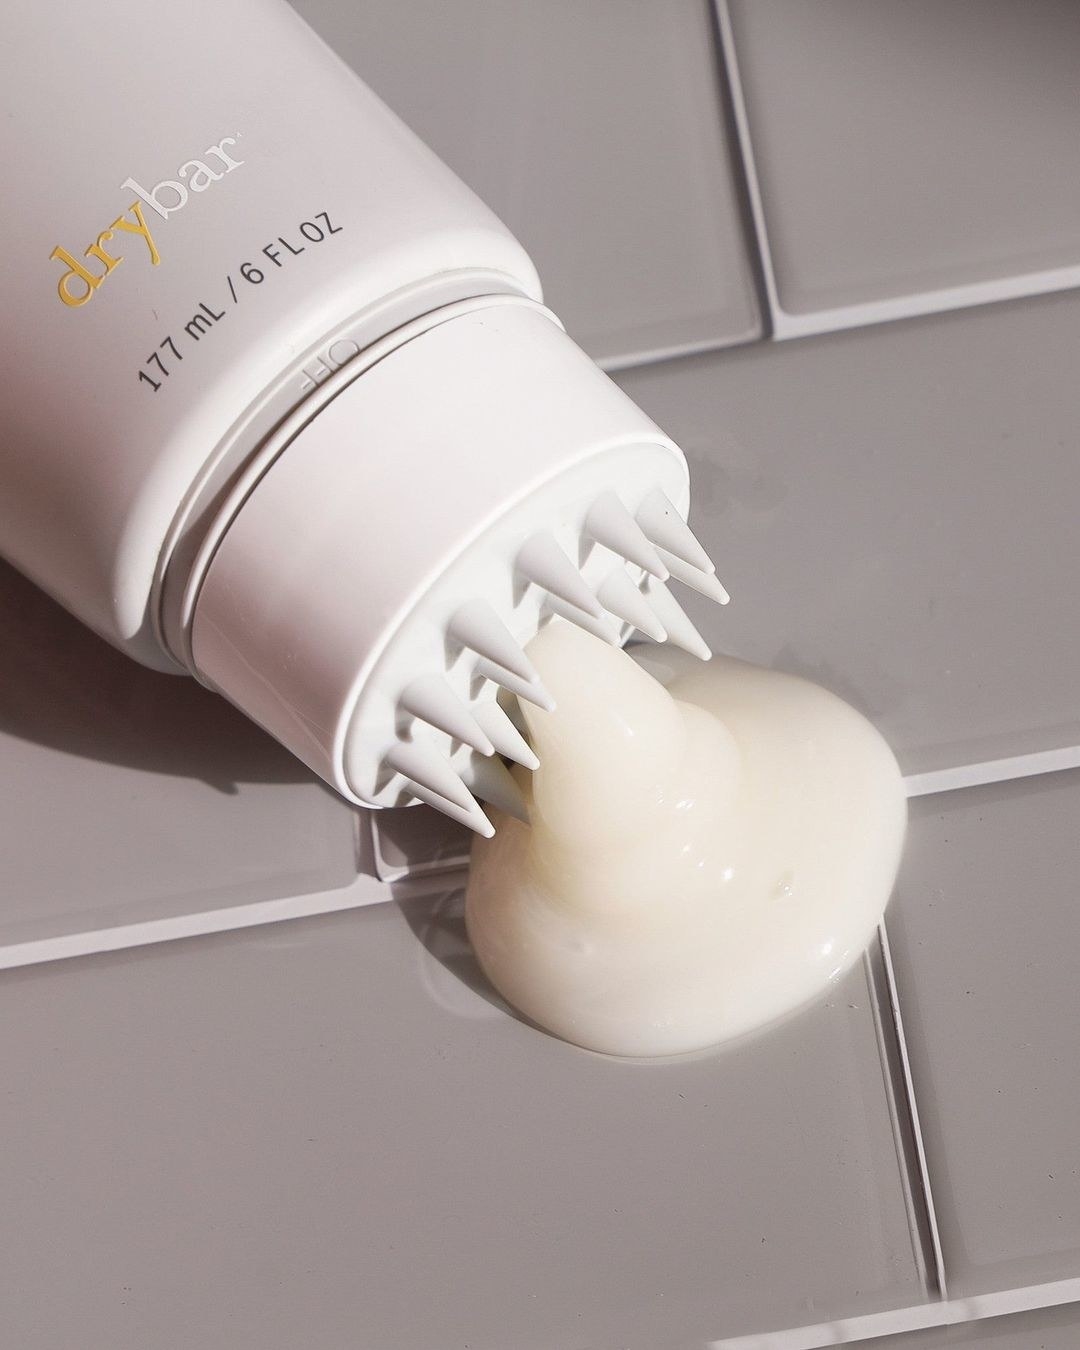 a close up of the scalp cleanser oozing out of the massaging applicator